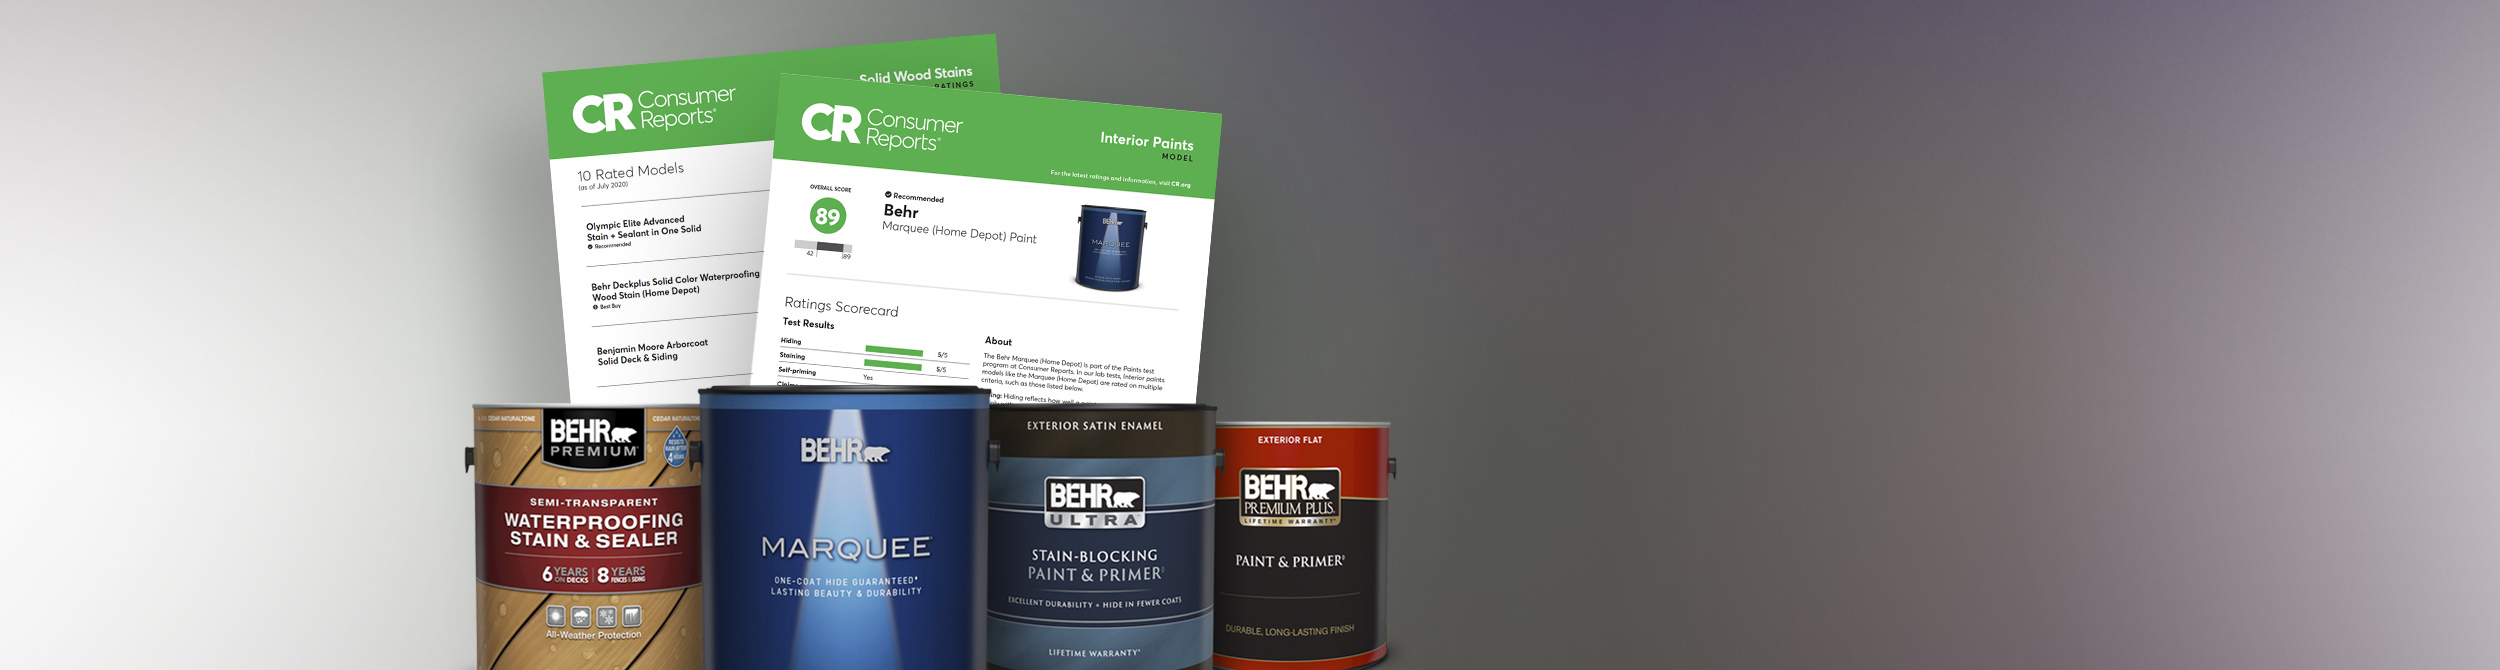 Image of 1 gal cans of Premium Plus Exterior Flat paint, Ultra Exterior Satin Enamel paint, Marquee Interior Satin Enamel,and Behr Premium Semi-Transparent Waterproofing Stain in the forefront. Two images of Consumer Reports findings are also showcased on image.